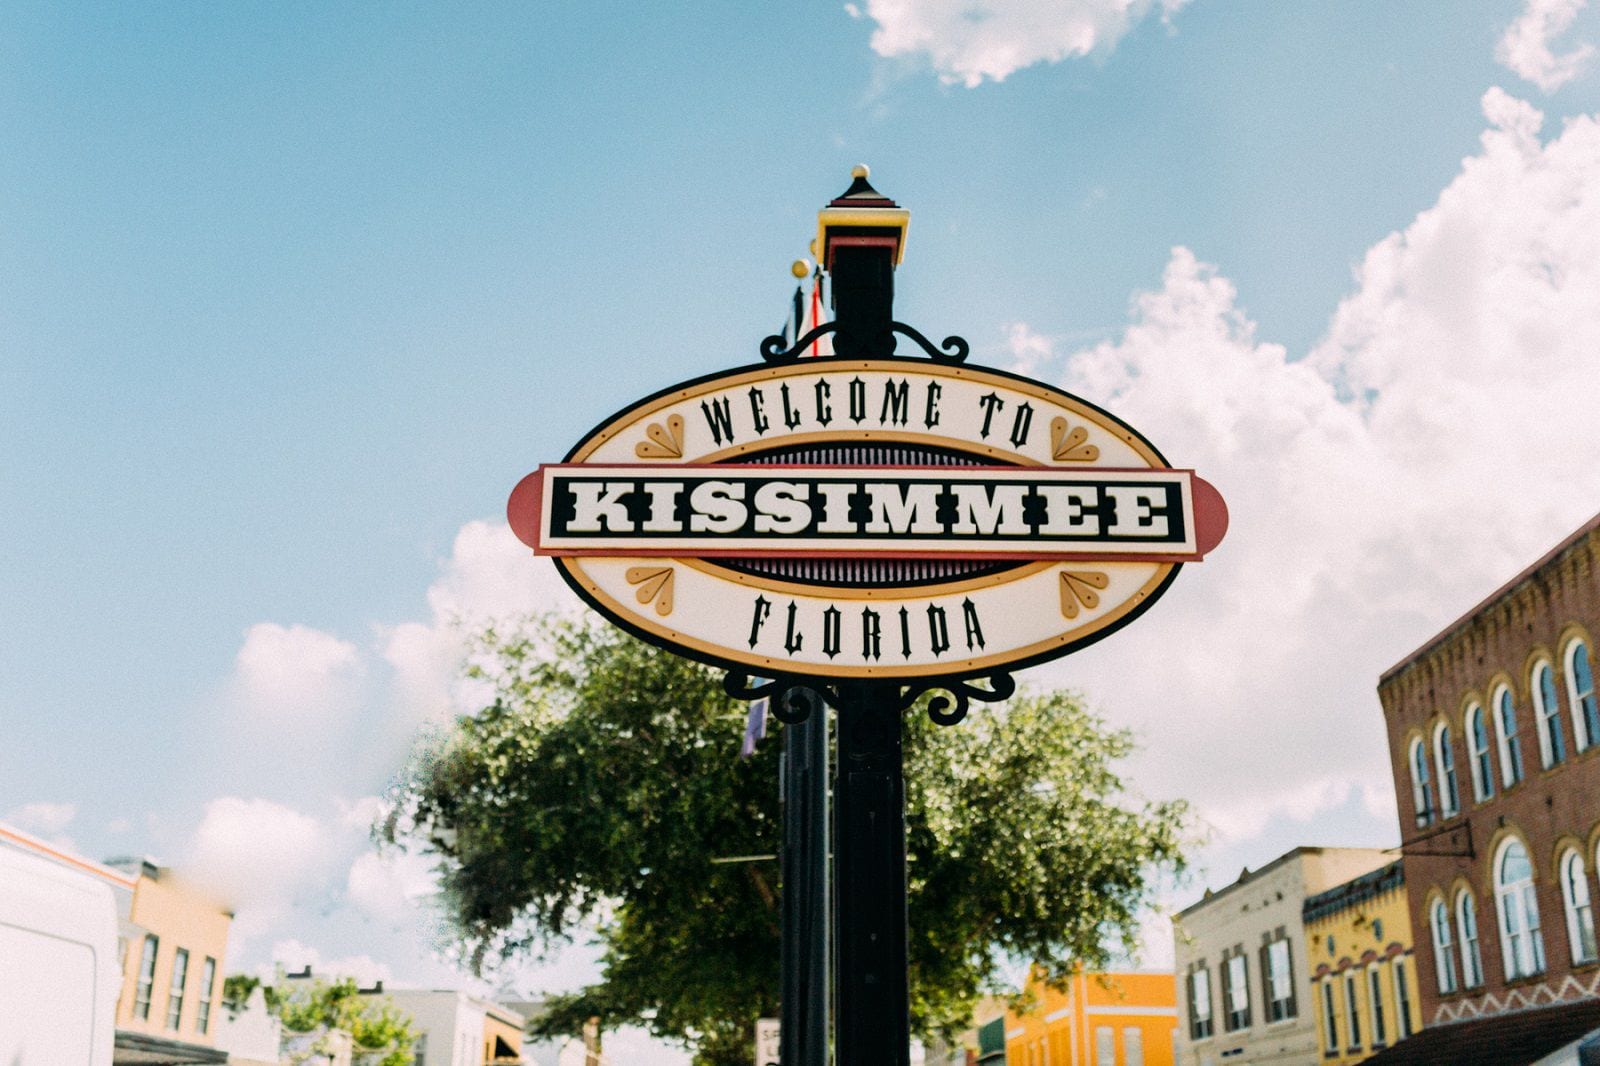 Is kissimmee the worst city in florida?